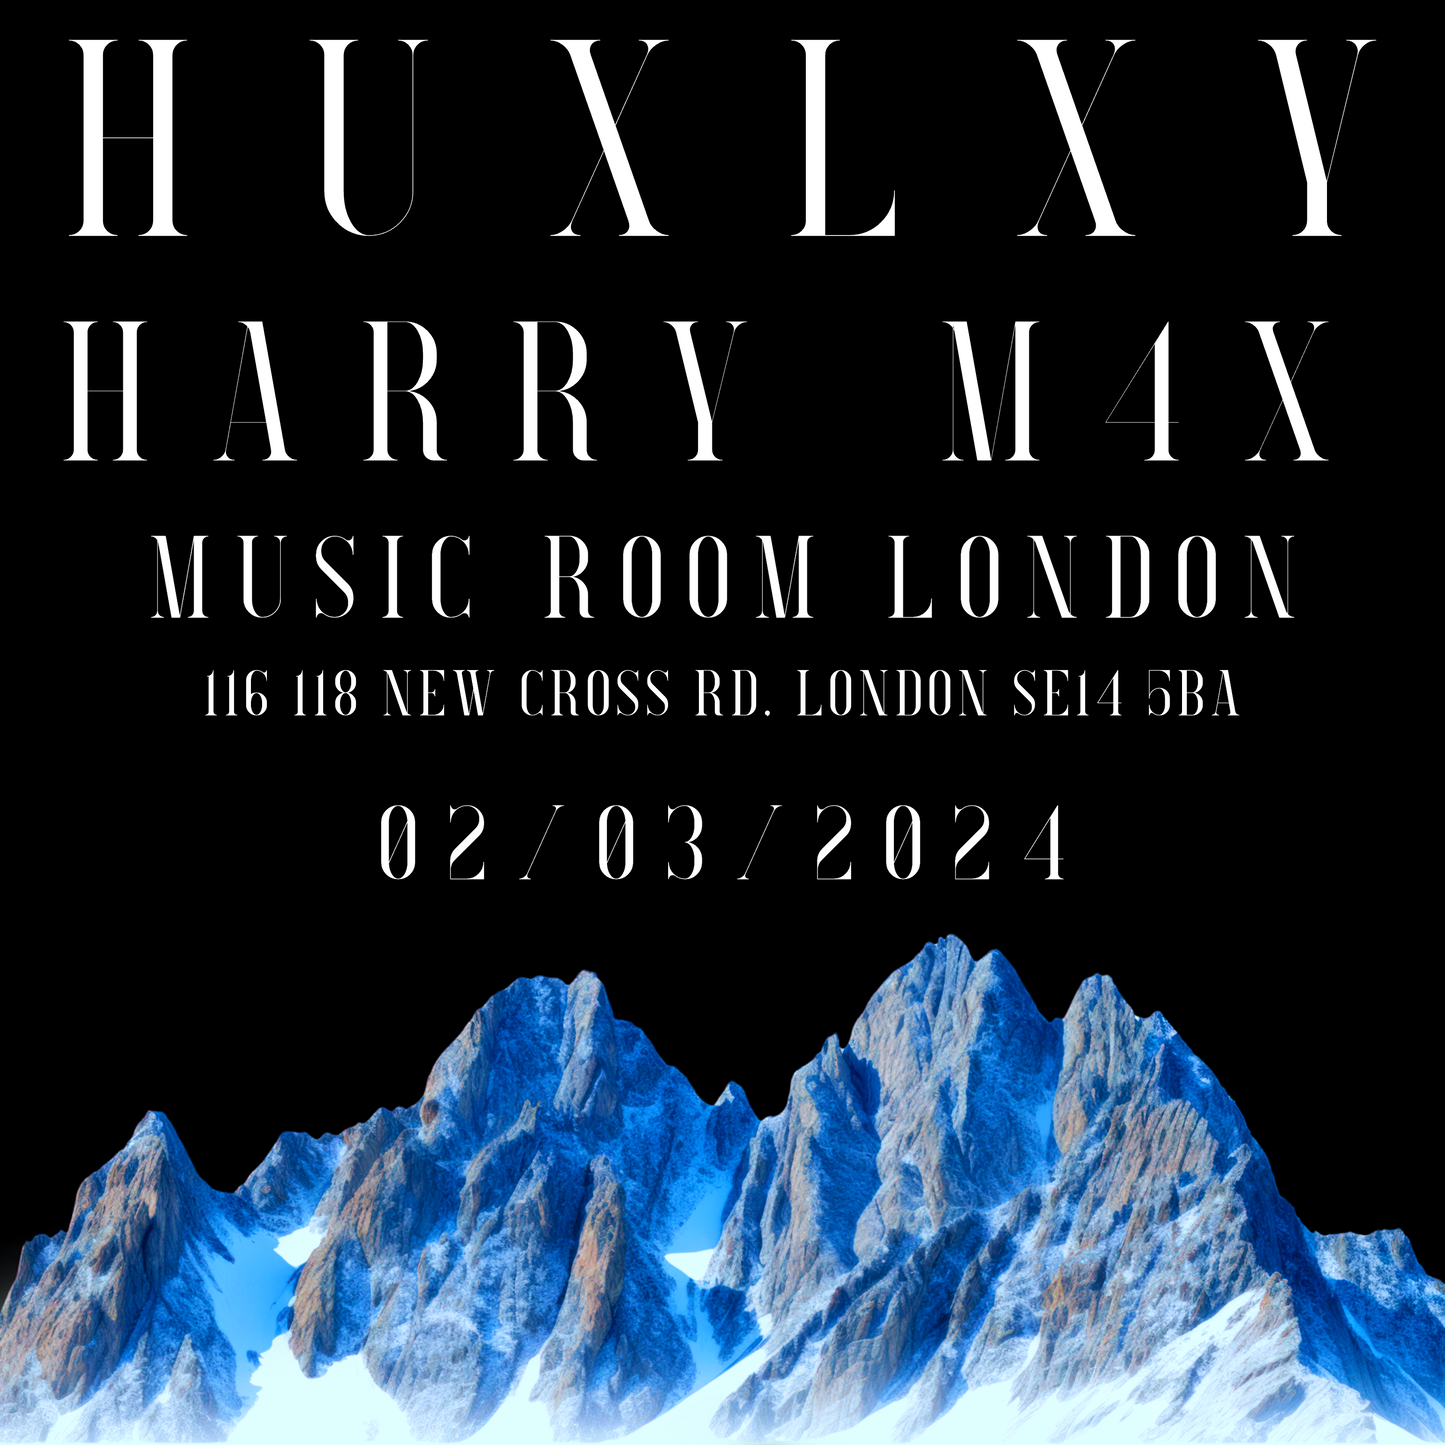 HUXLXY LIVE AT MUSIC ROOM LONDON